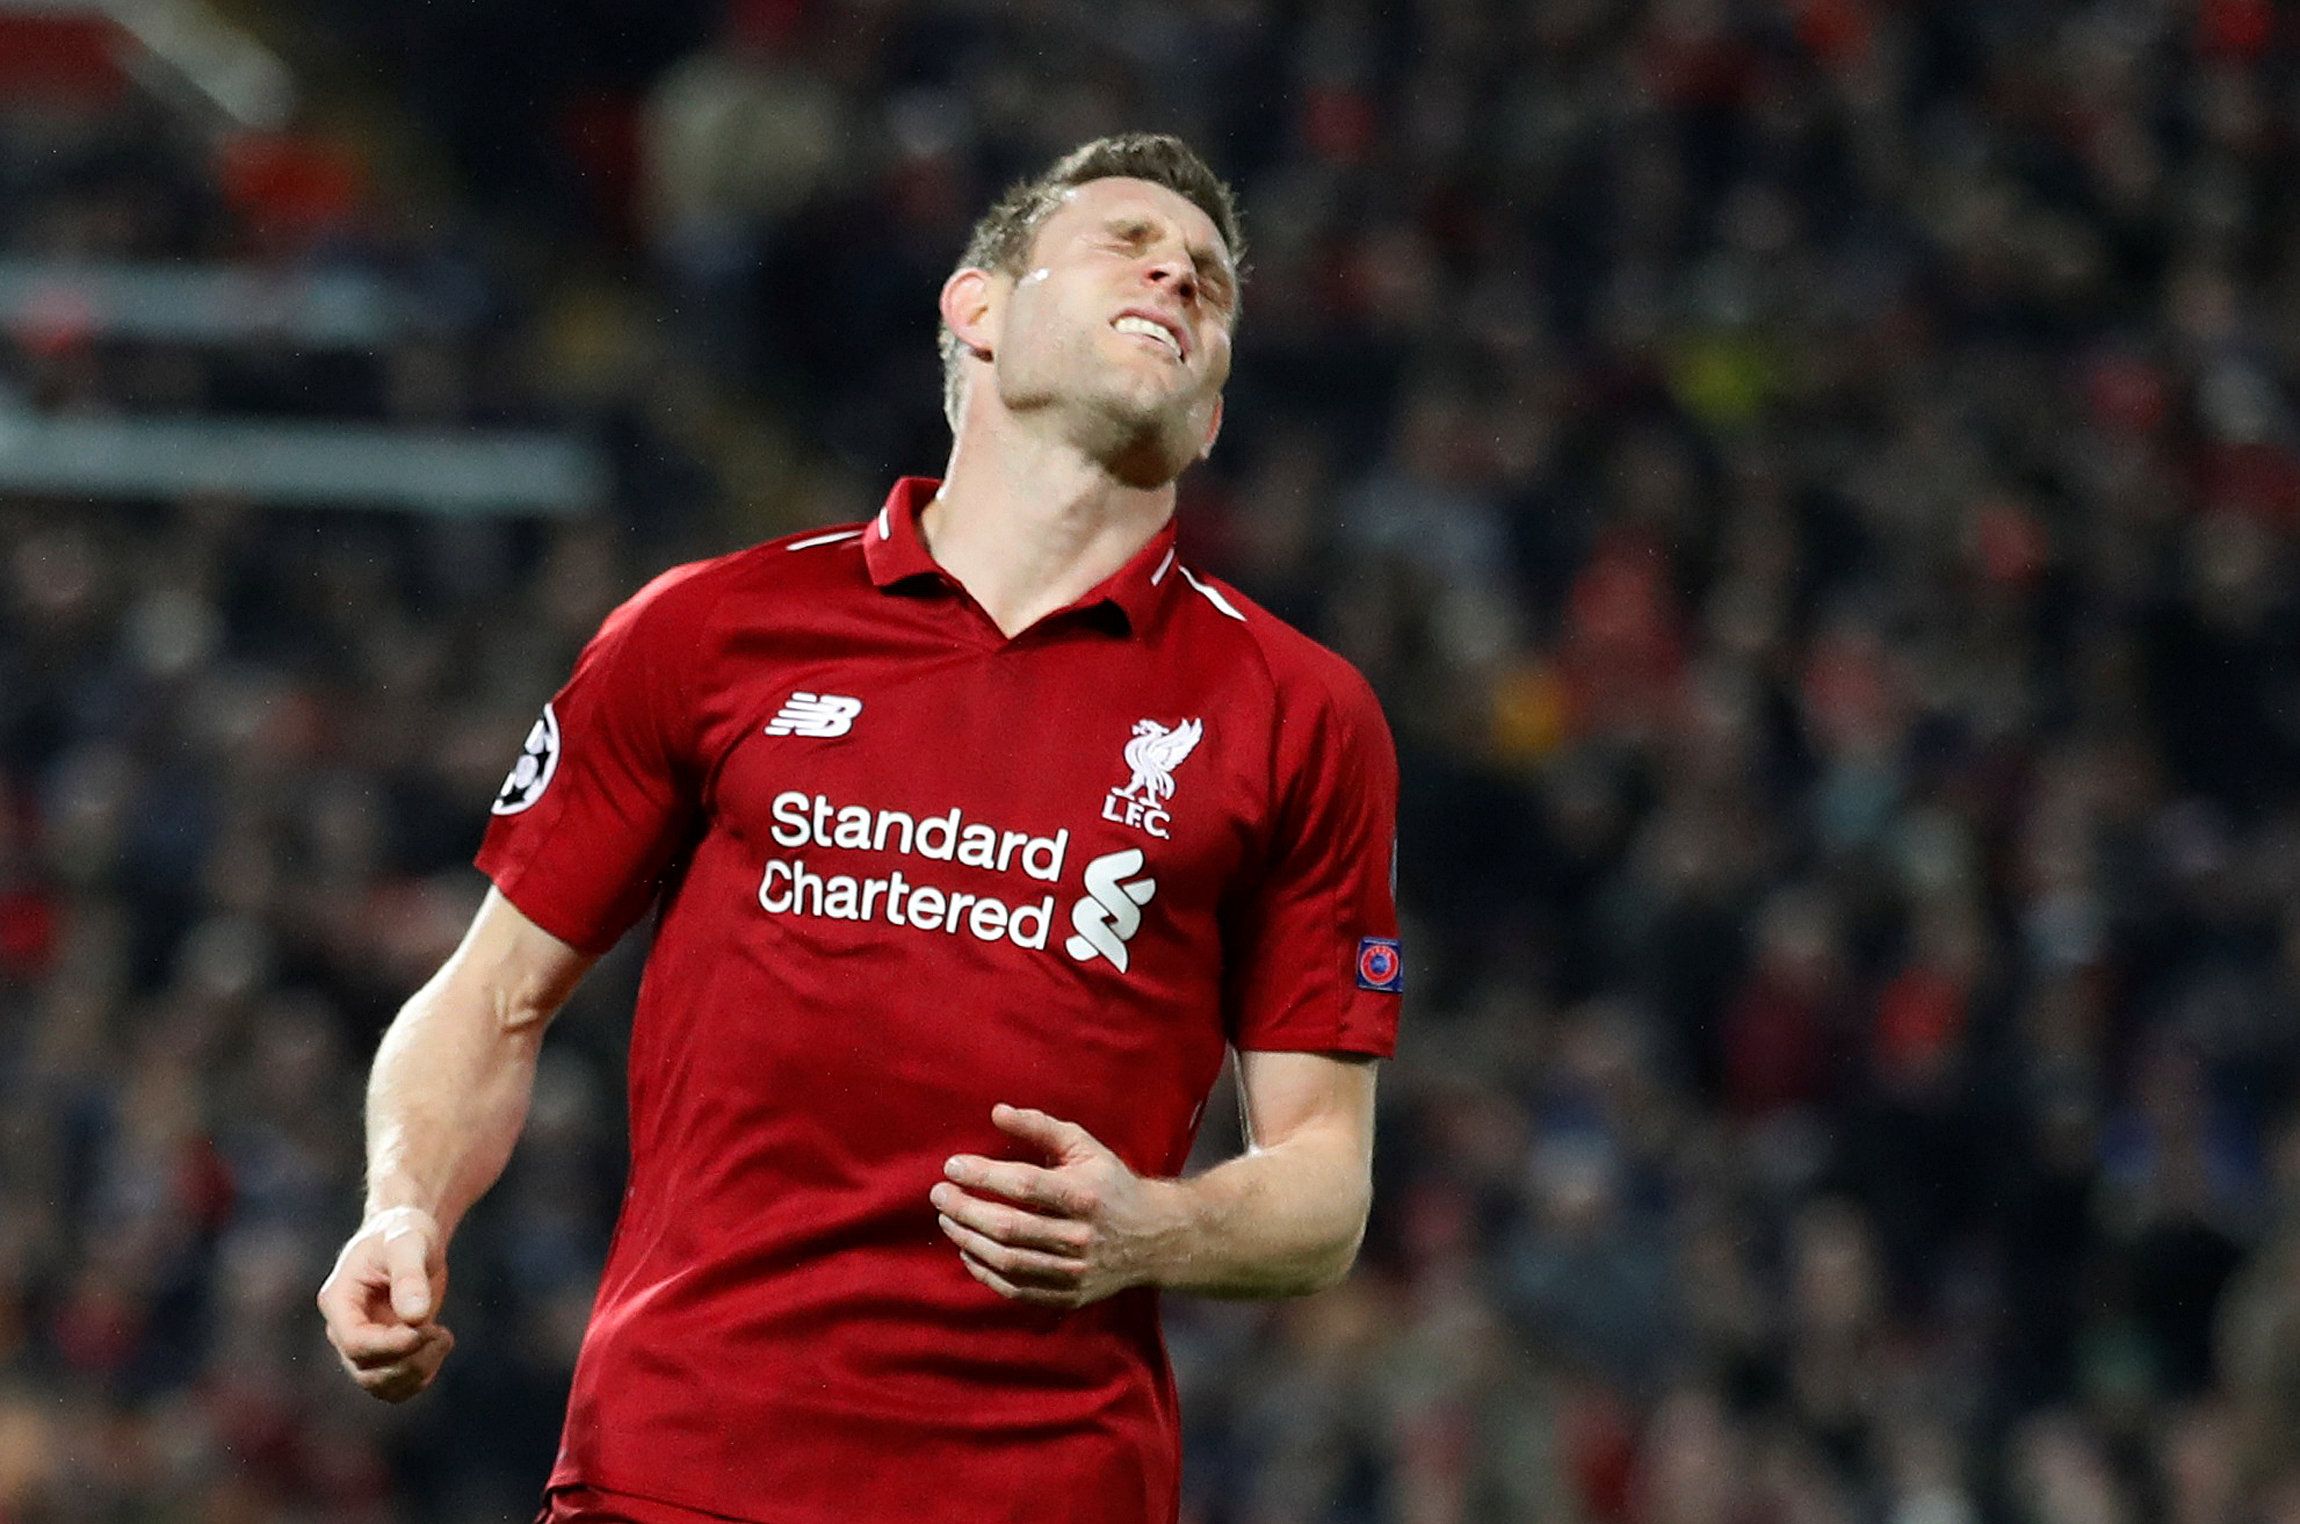 Soccer Football - Champions League - Group Stage - Group C - Liverpool v Napoli - Anfield, Liverpool, Britain - December 11, 2018  Liverpool's James Milner reacts  Action Images via Reuters/Carl Recine